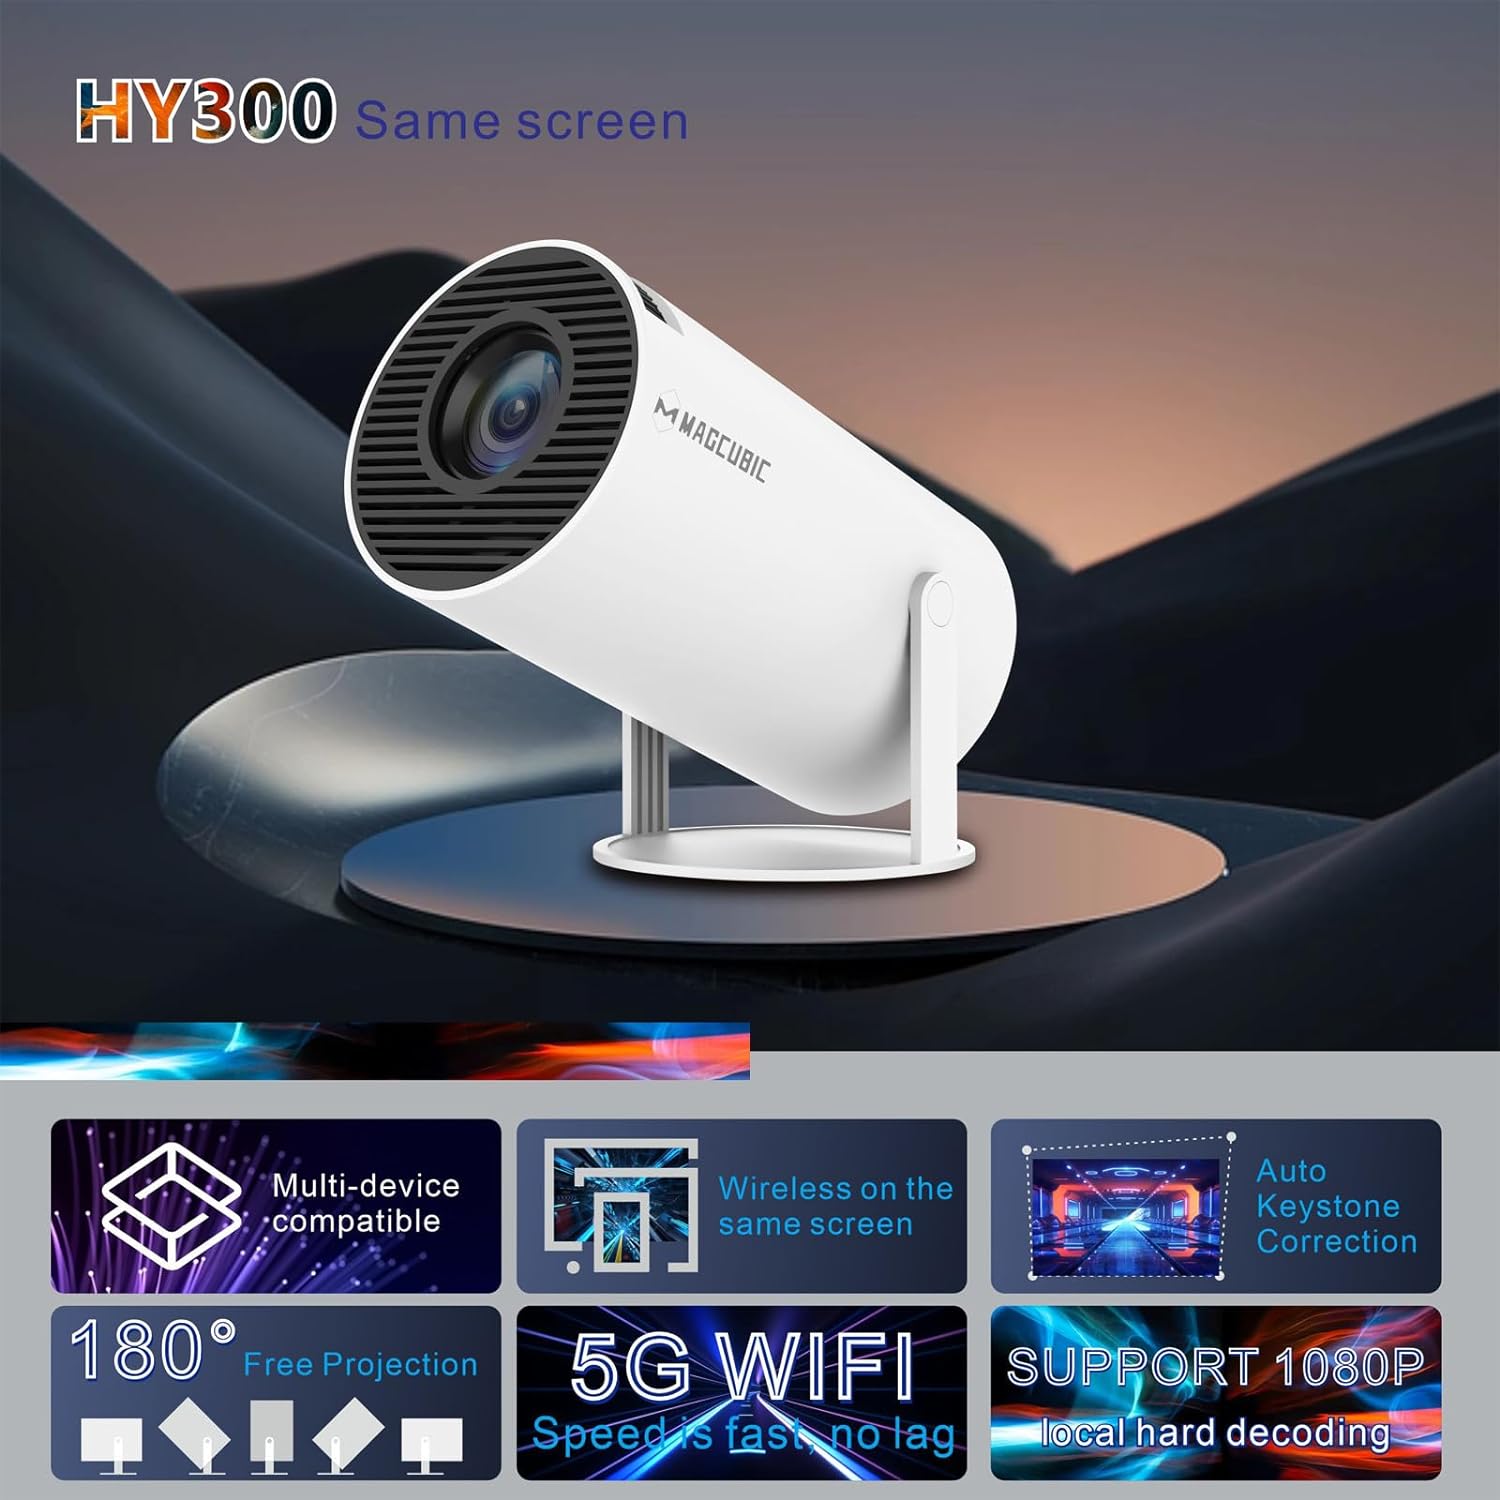 Magcubic HY300 Portable 4K Projector - WiFi6, Android 11, Bluetooth 5.0 - Ultra-Sharp Imaging, Smart Connectivity, Superior Audio